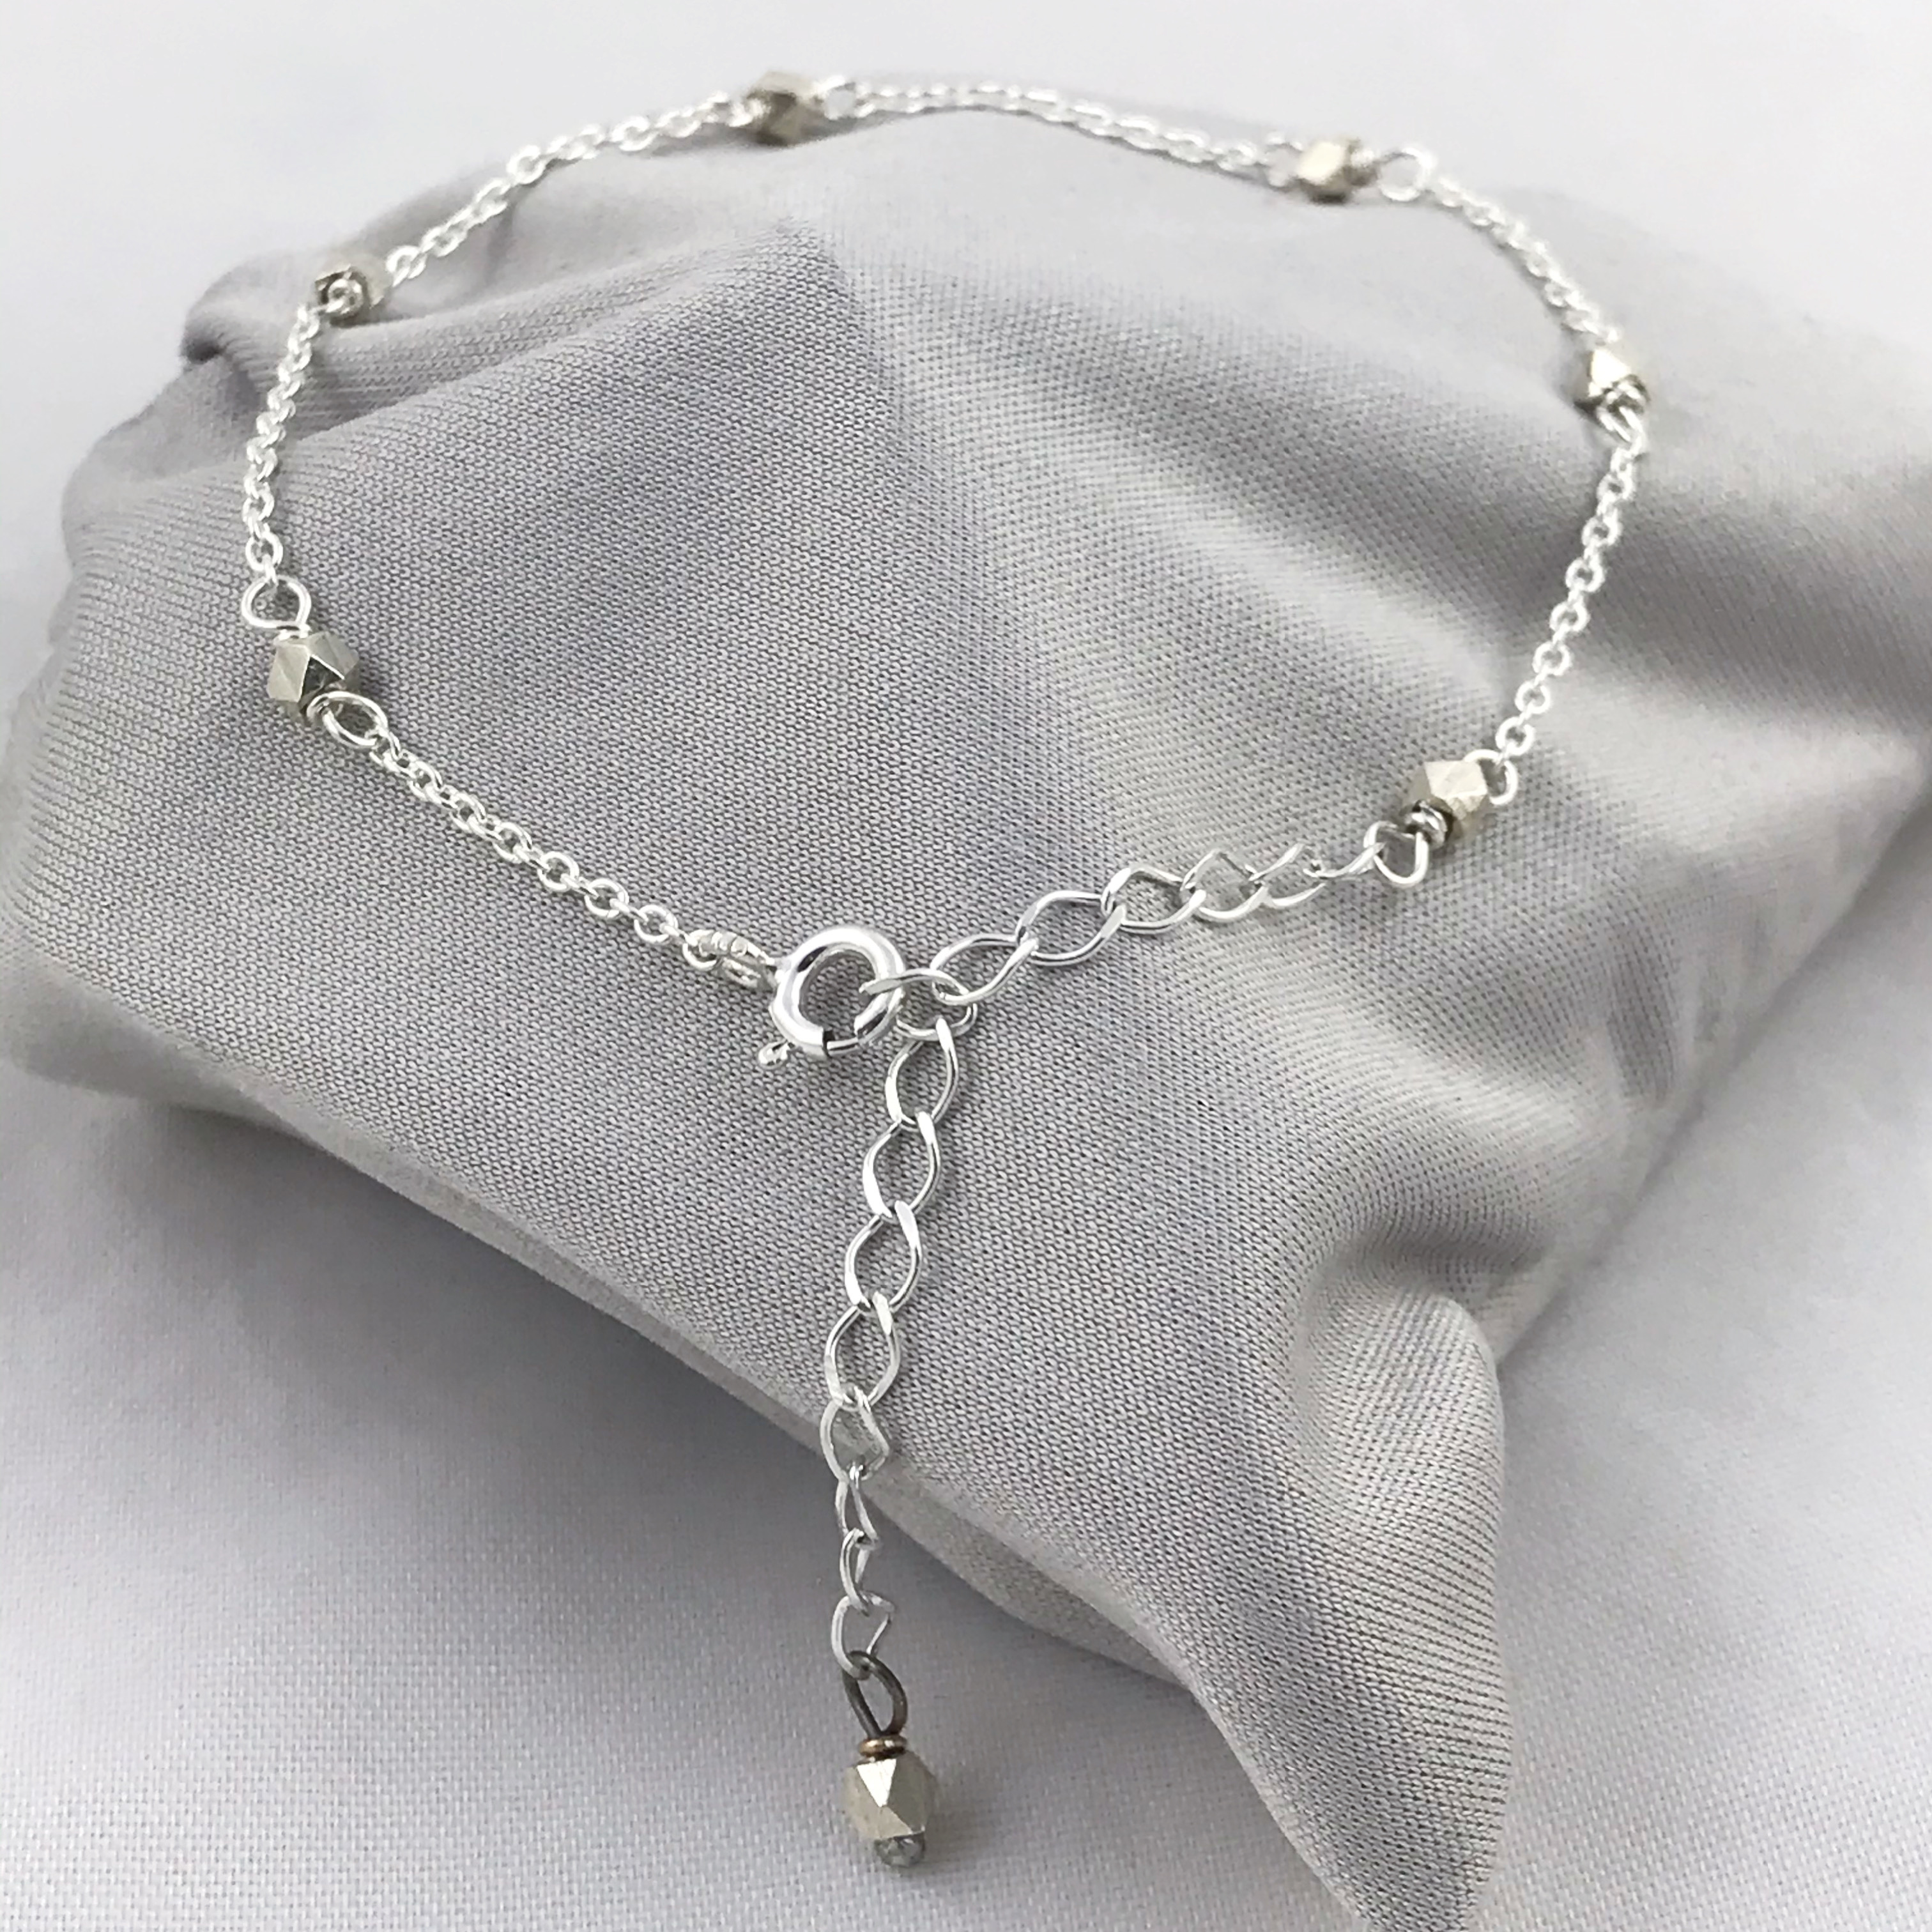 Sparkly Nugget Trail Bracelet / Fine Silver Nuggets / Sterling Silver Chain  / Adjustable Size